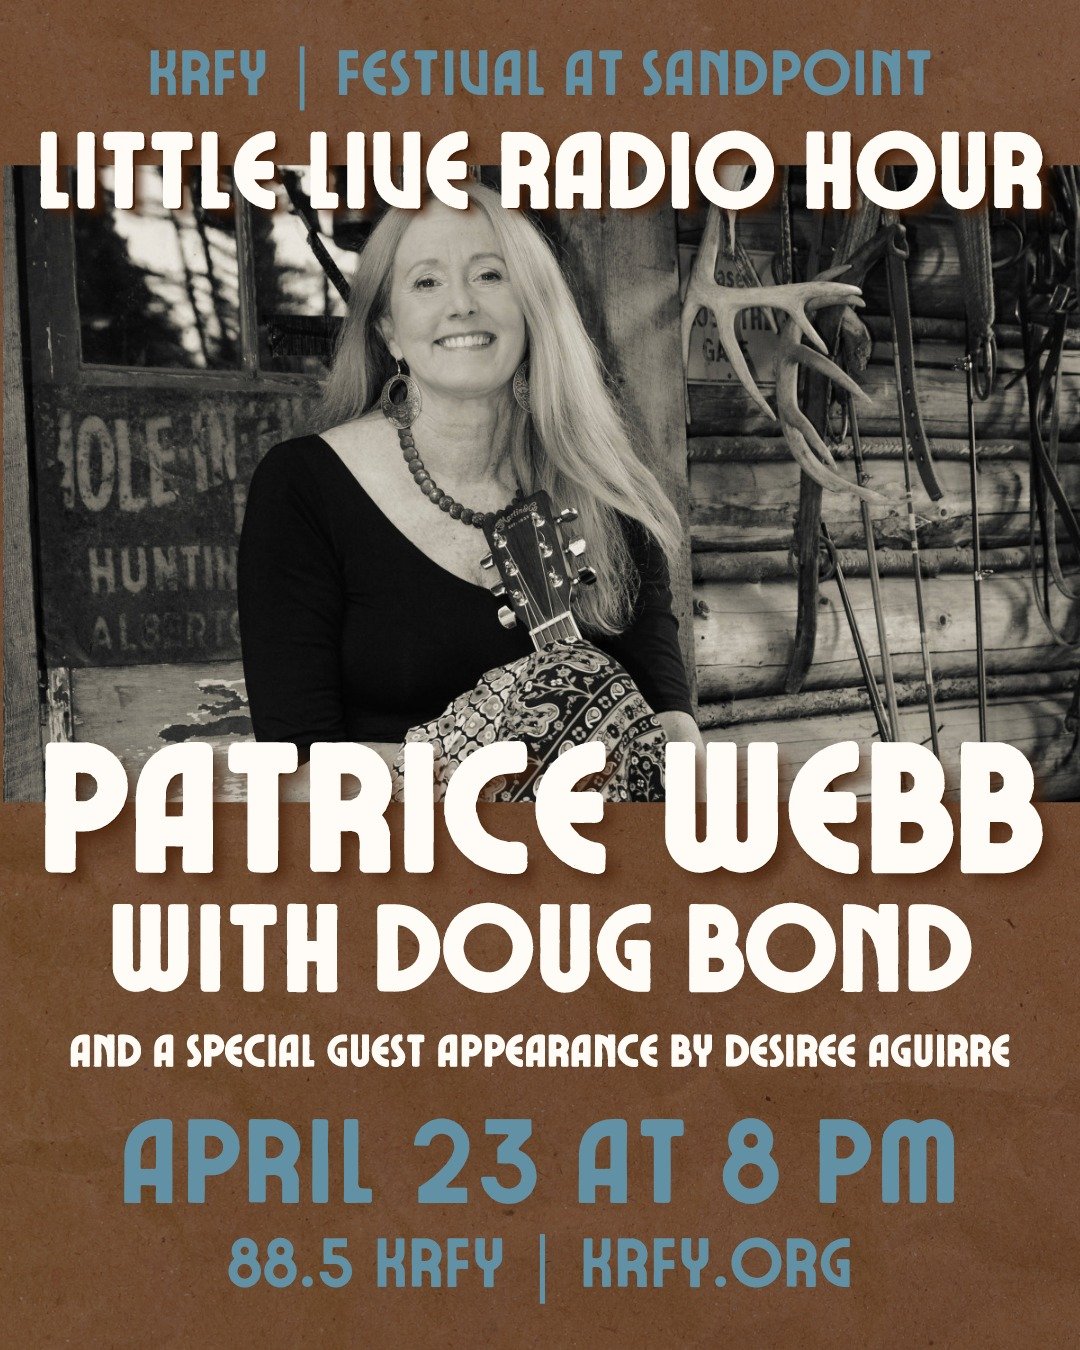 Join us on Tuesday, April 23, at 8 PM for Little Live Radio Hour, featuring Patrice Webb with Doug Bond and a special guest appearance by Desiree Aguirre!

Turn your radio on to 88.5 KRFY on the FM dial or stream at www.krfy.org to tune in. Intereste